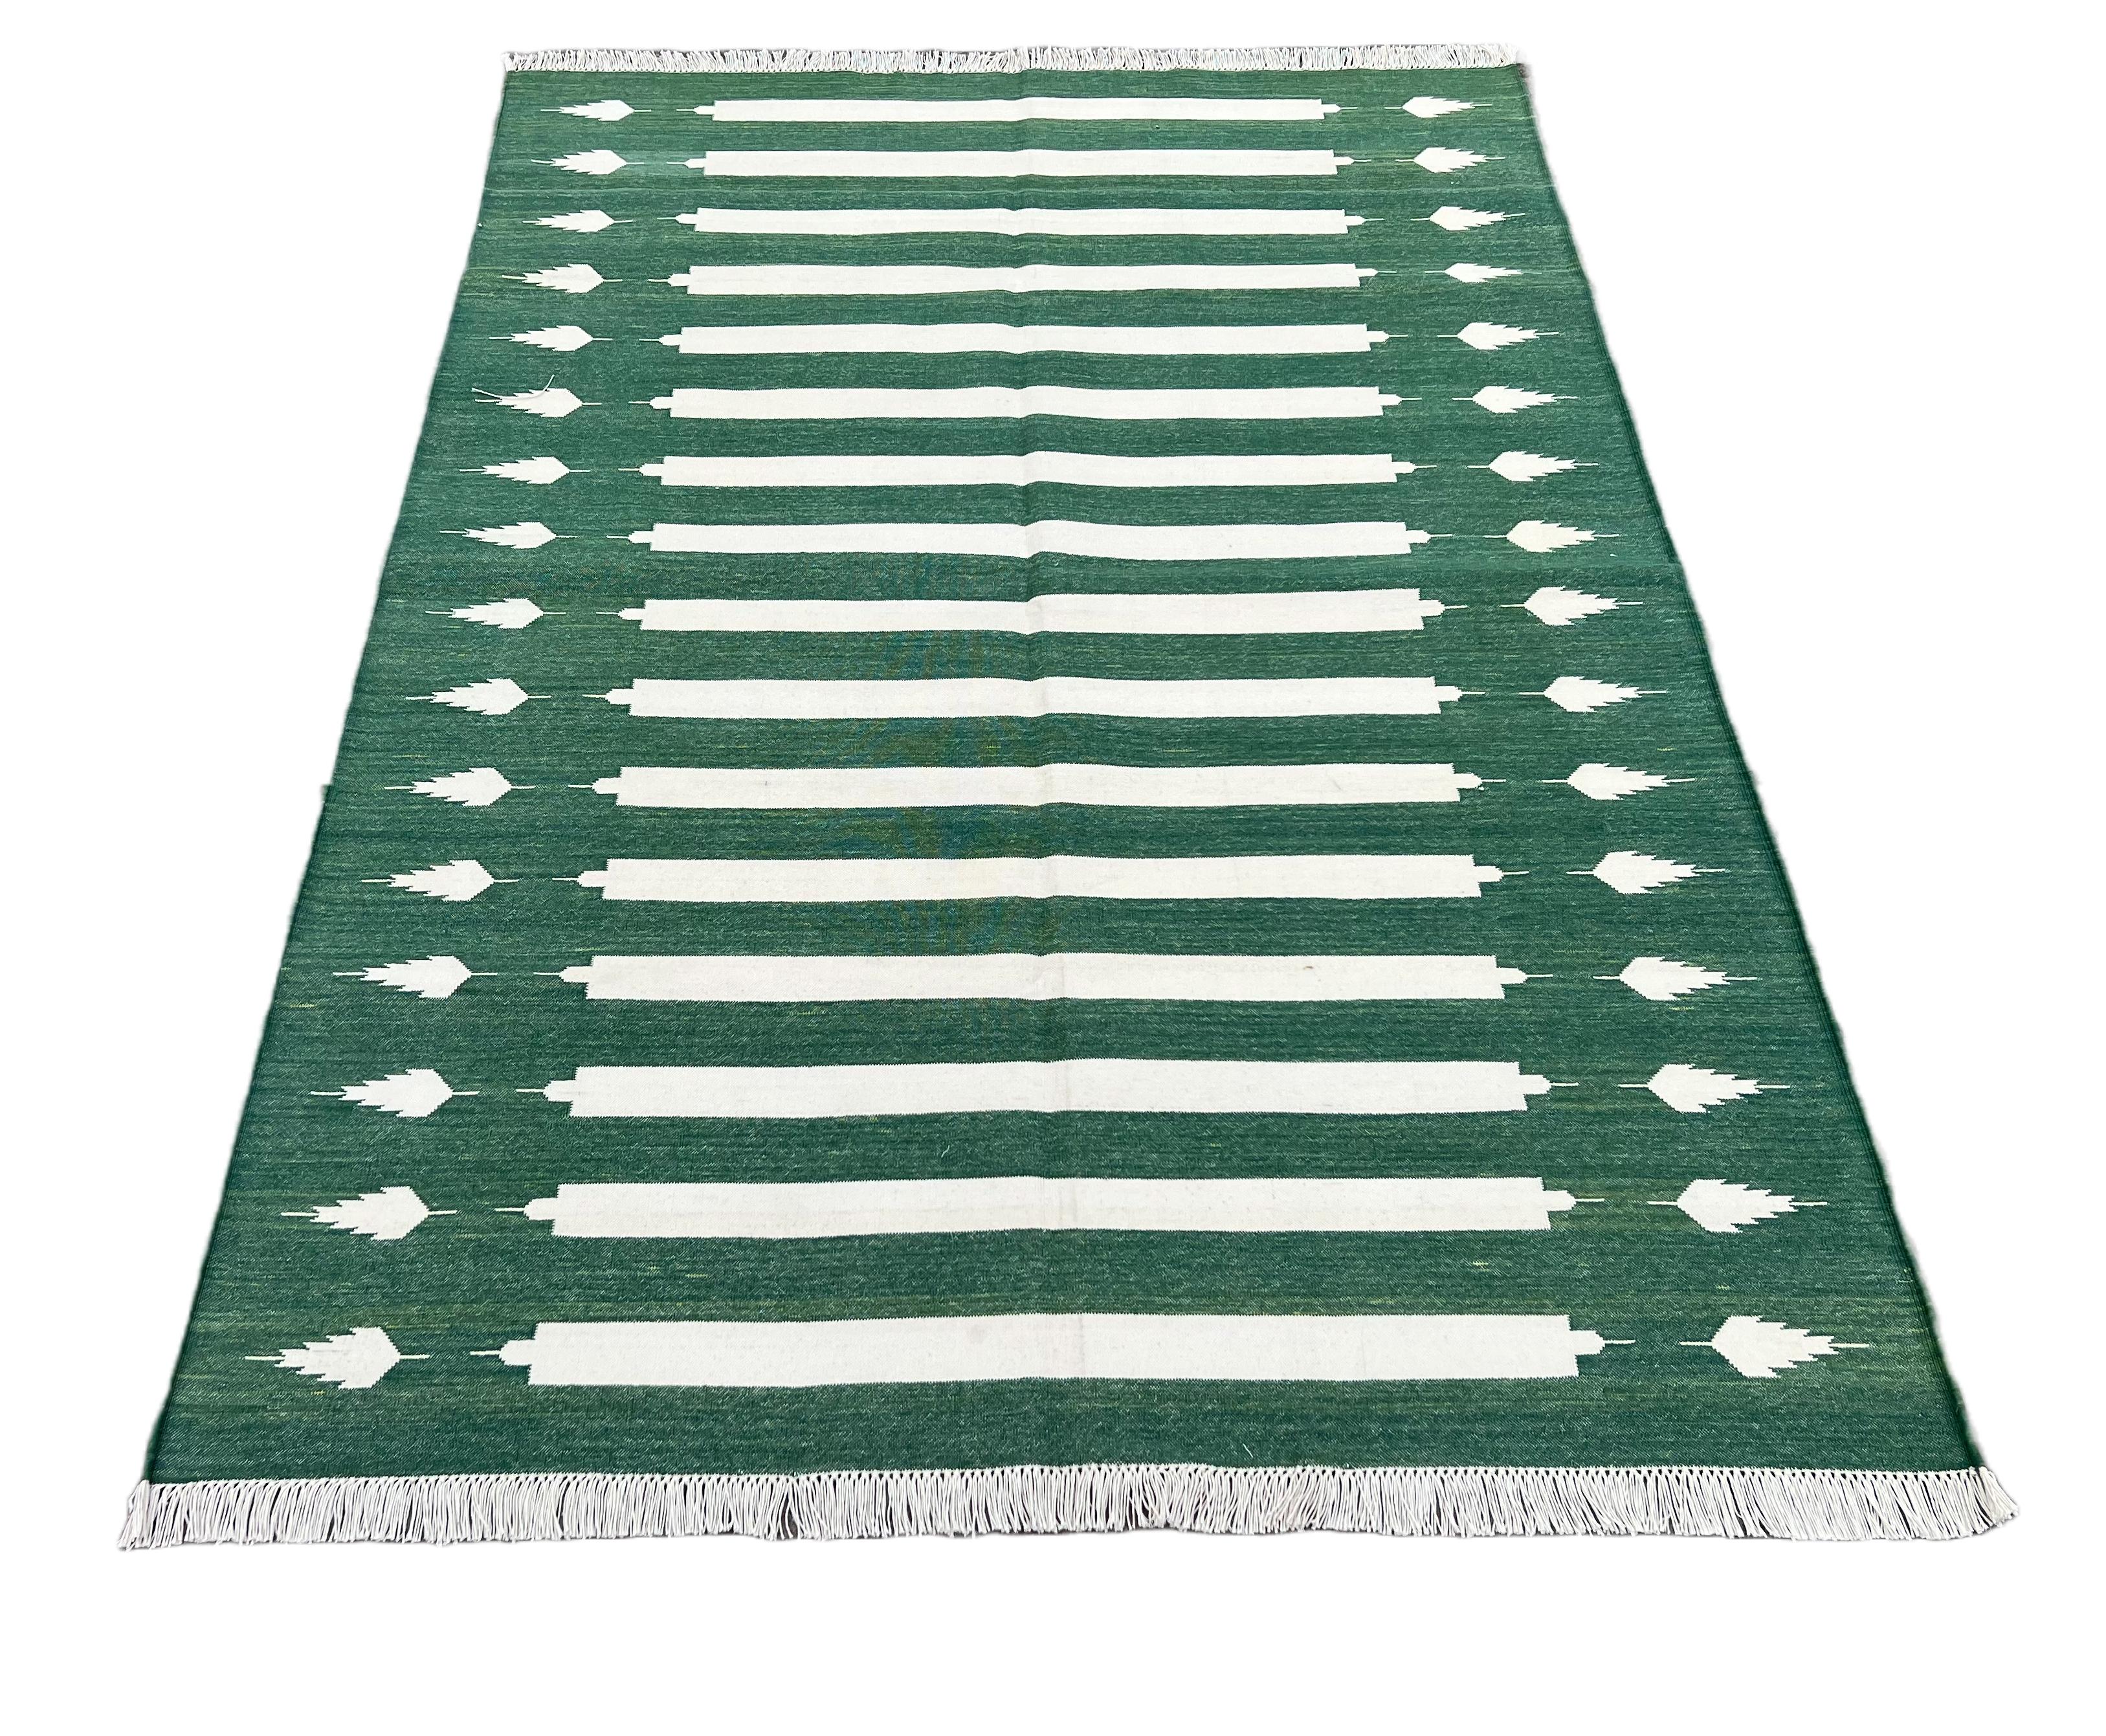 Hand-Woven Handmade Cotton Area Flat Weave Rug, Green And White Striped Indian Dhurrie Rug For Sale